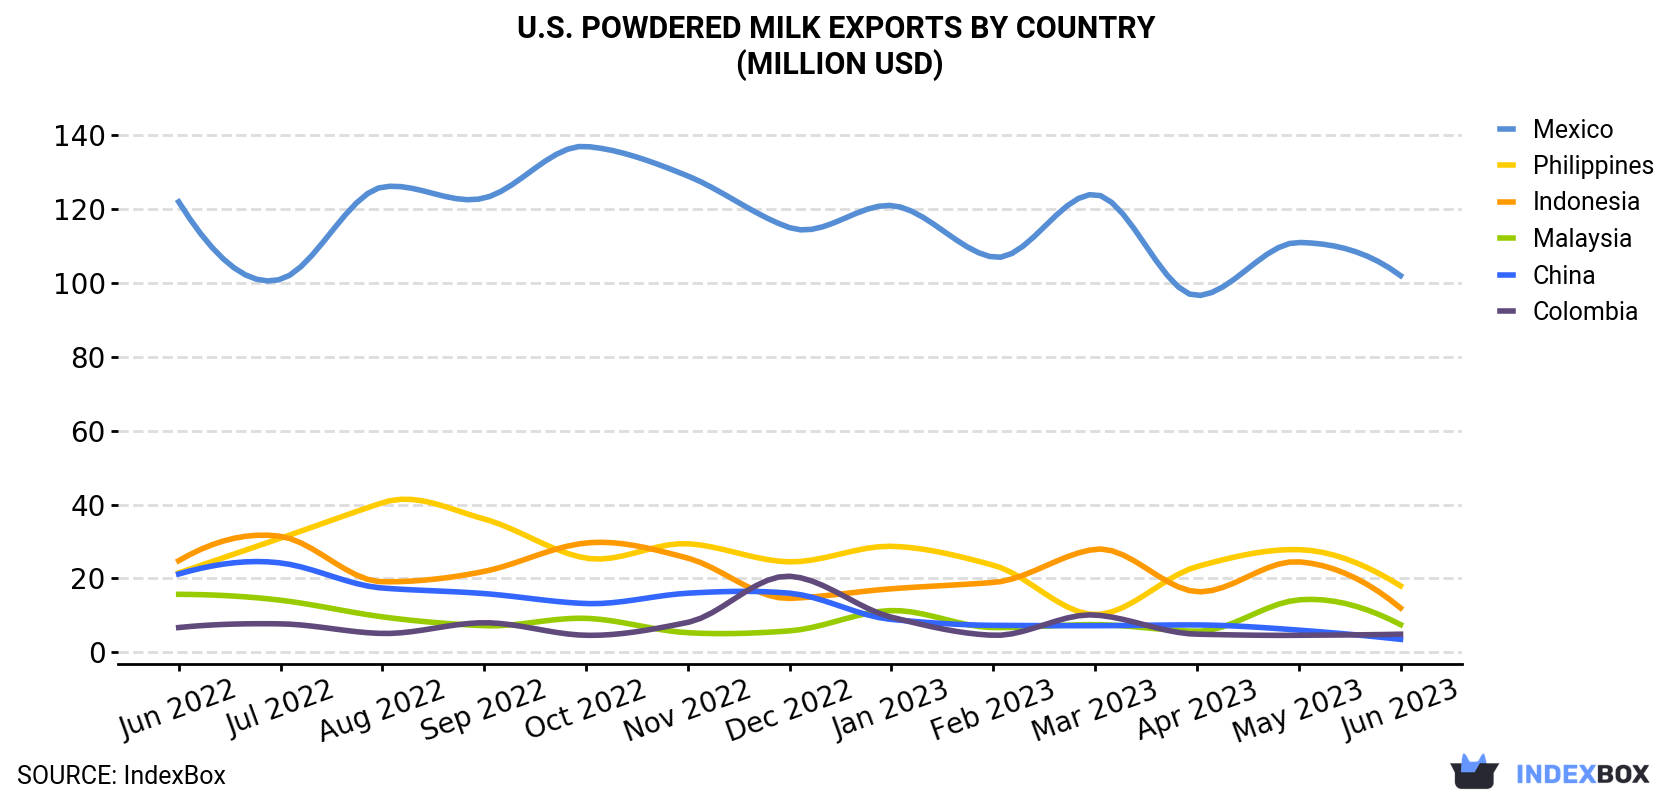 U.S. Powdered Milk Exports By Country (Million USD)